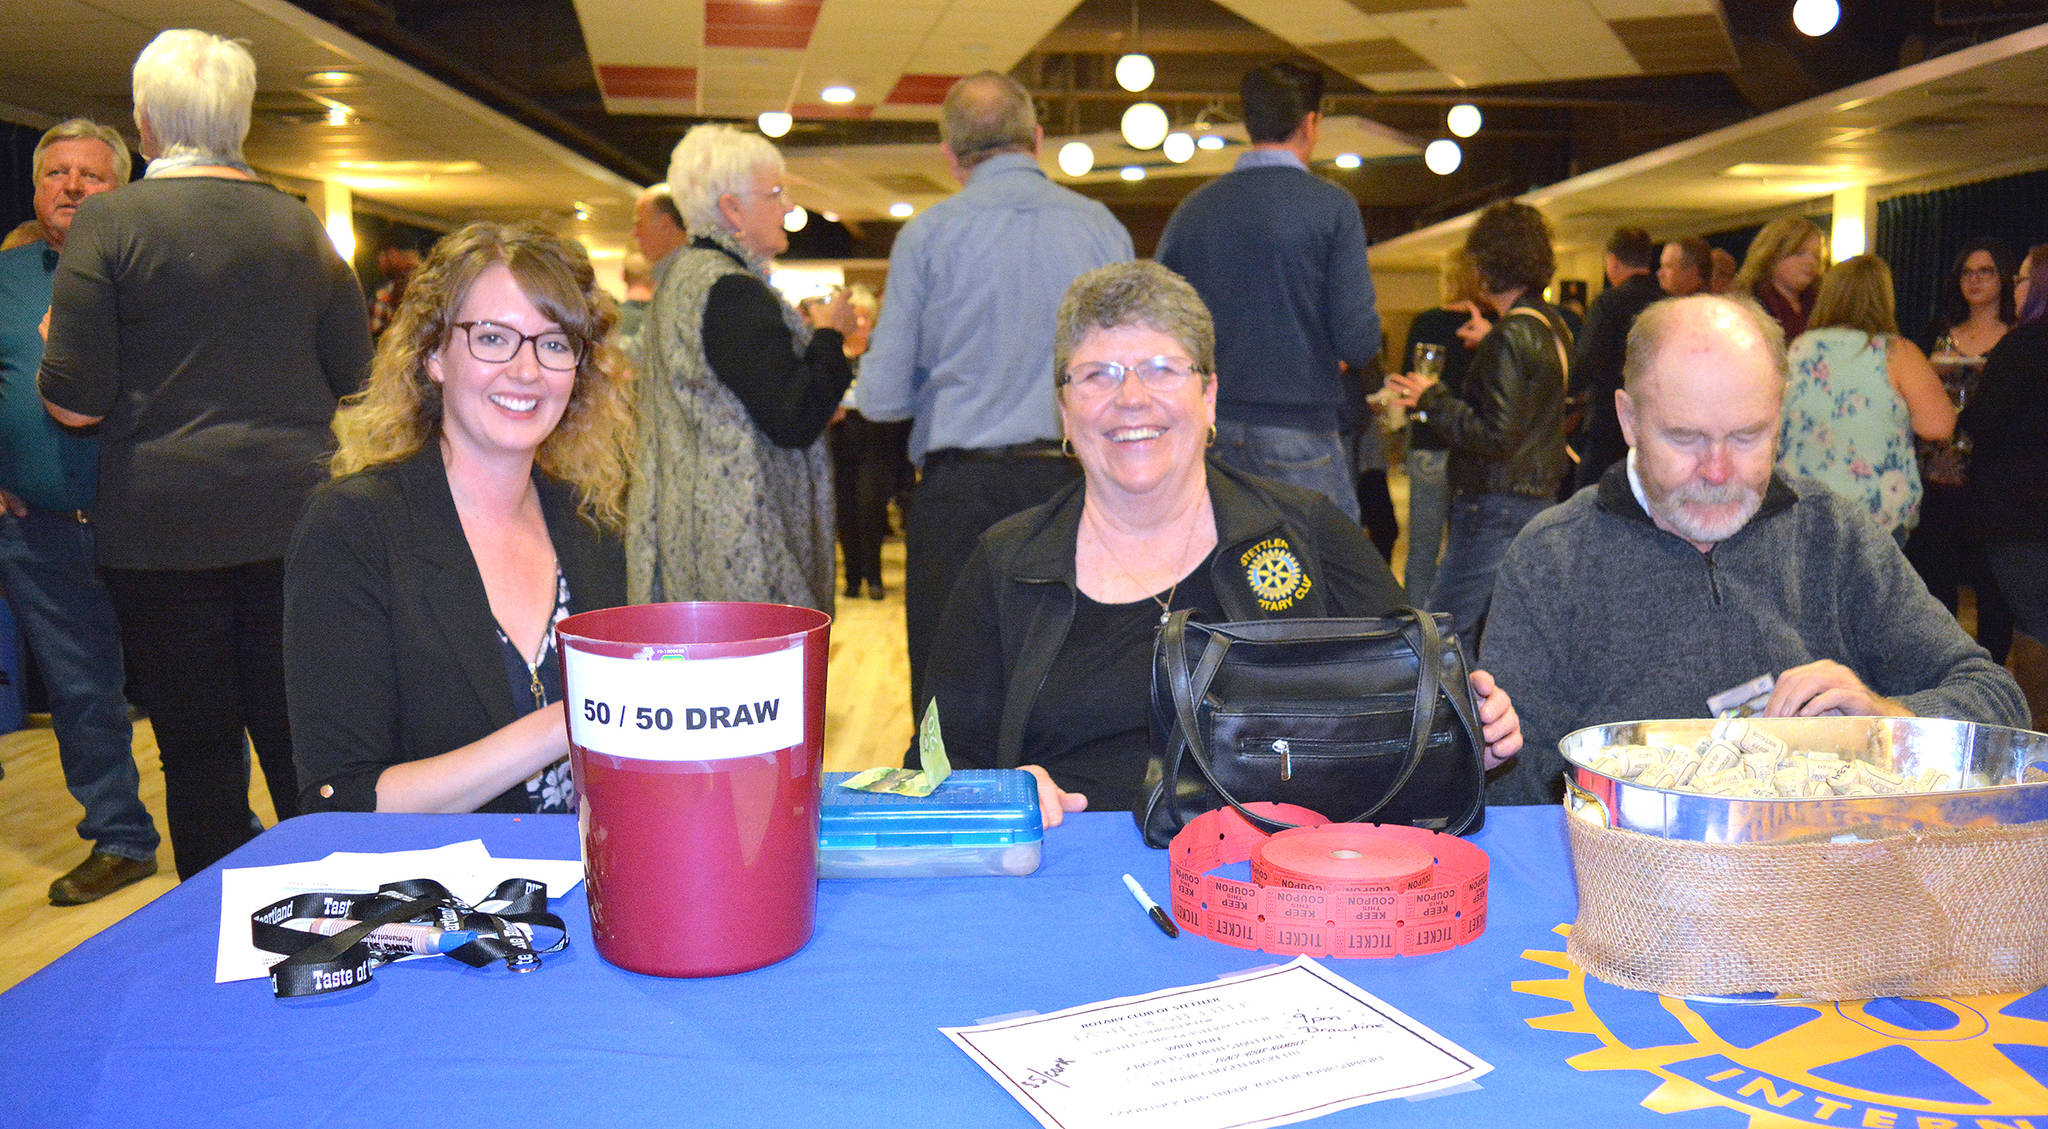 Stacey Benjamain from the Stettler Board of Trade, left, and Fran Snowden of Stettler Rotary Club sell tickets at Taste of Stettler, while Eric Snowden counts money. The 200 available tickets sold out fast for the annual Rotary Taste of Stettler event held at the Hub on Sept. 21. Lisa Joy/Stettler Independent